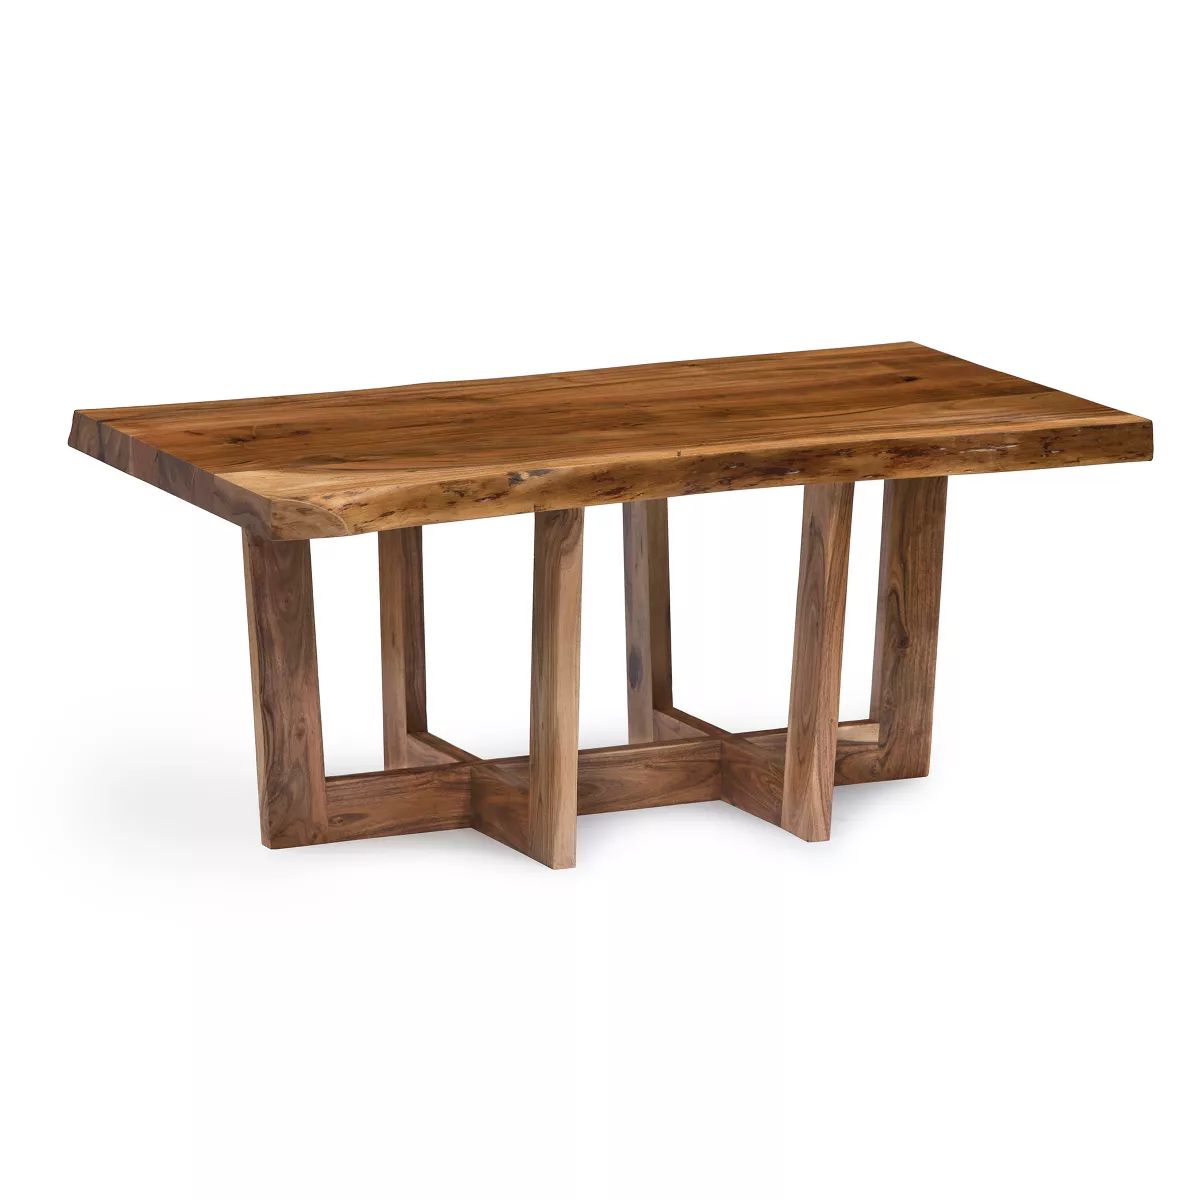 Alaterre Furniture 42" Berkshire Natural Brown Live Edge Coffee Table Solid Wood | Target